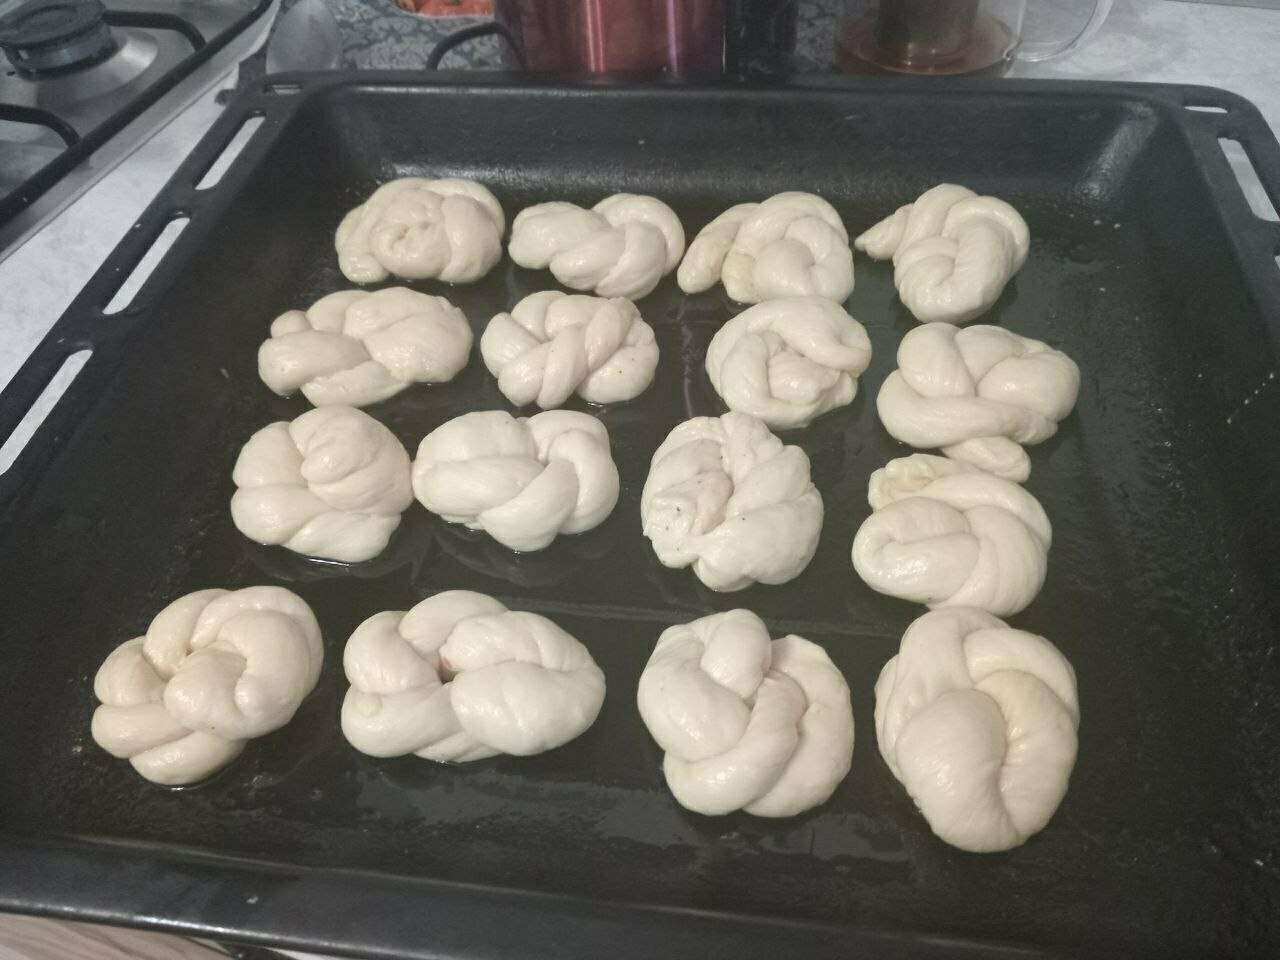 16 folded buns on a black oven tray